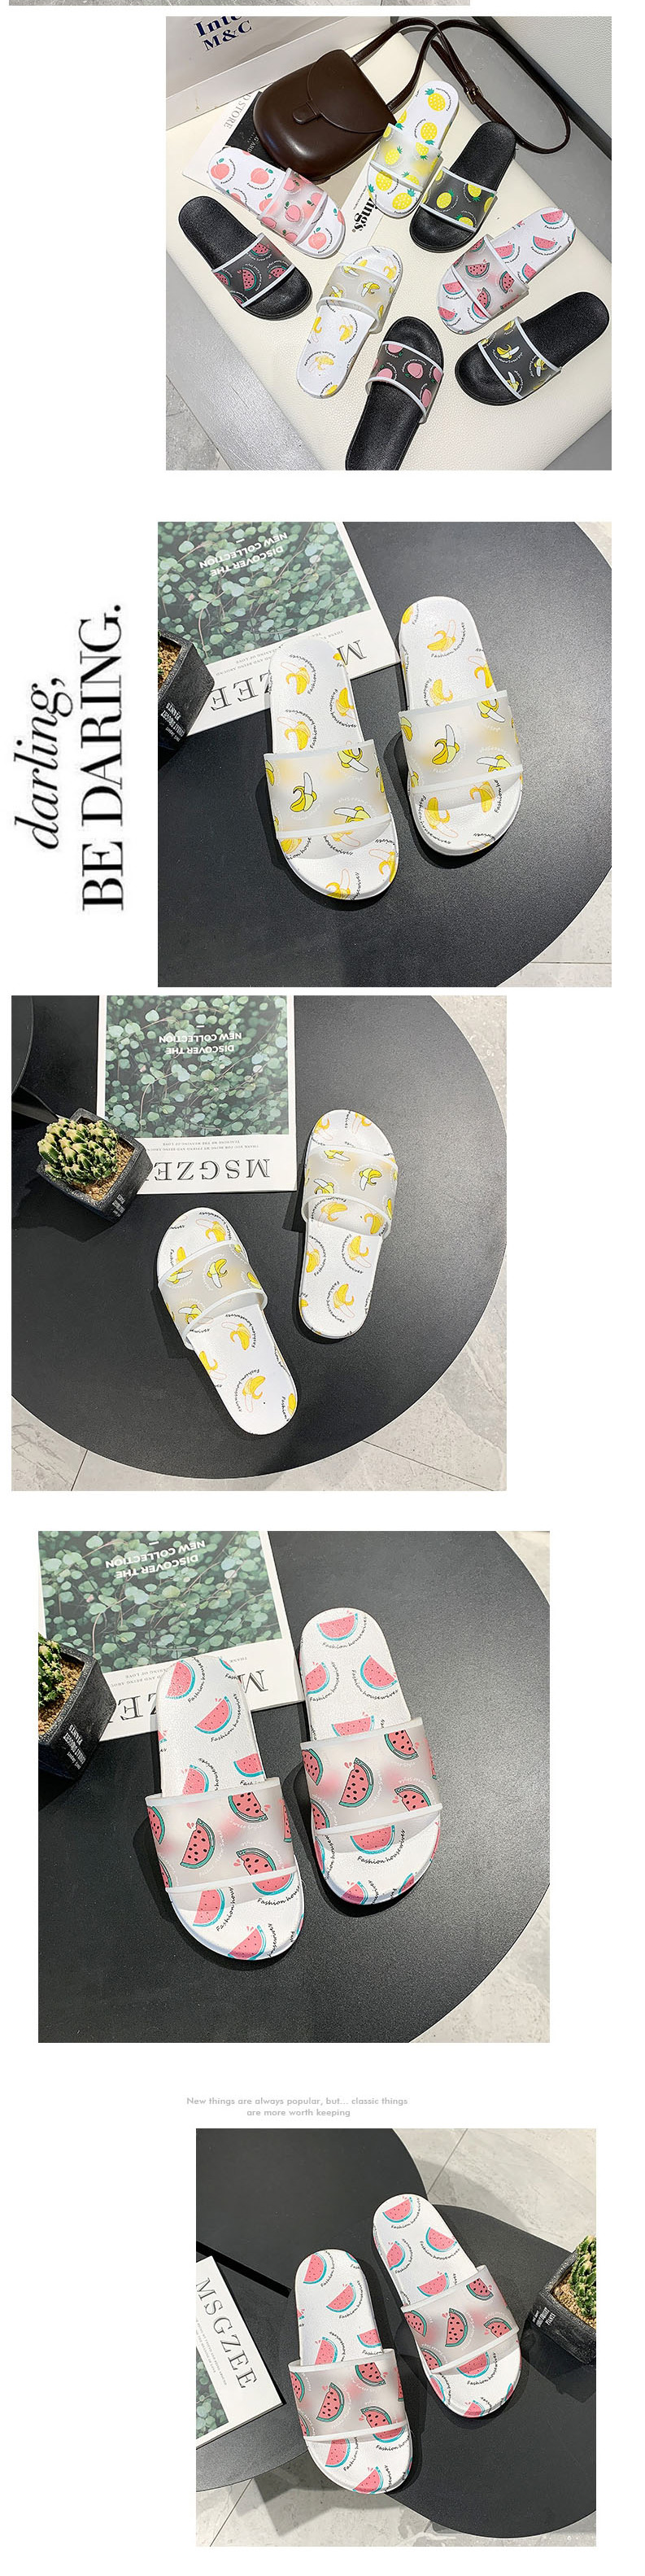 Fashion Banana With White Fruit Fruit Sandals,Slippers